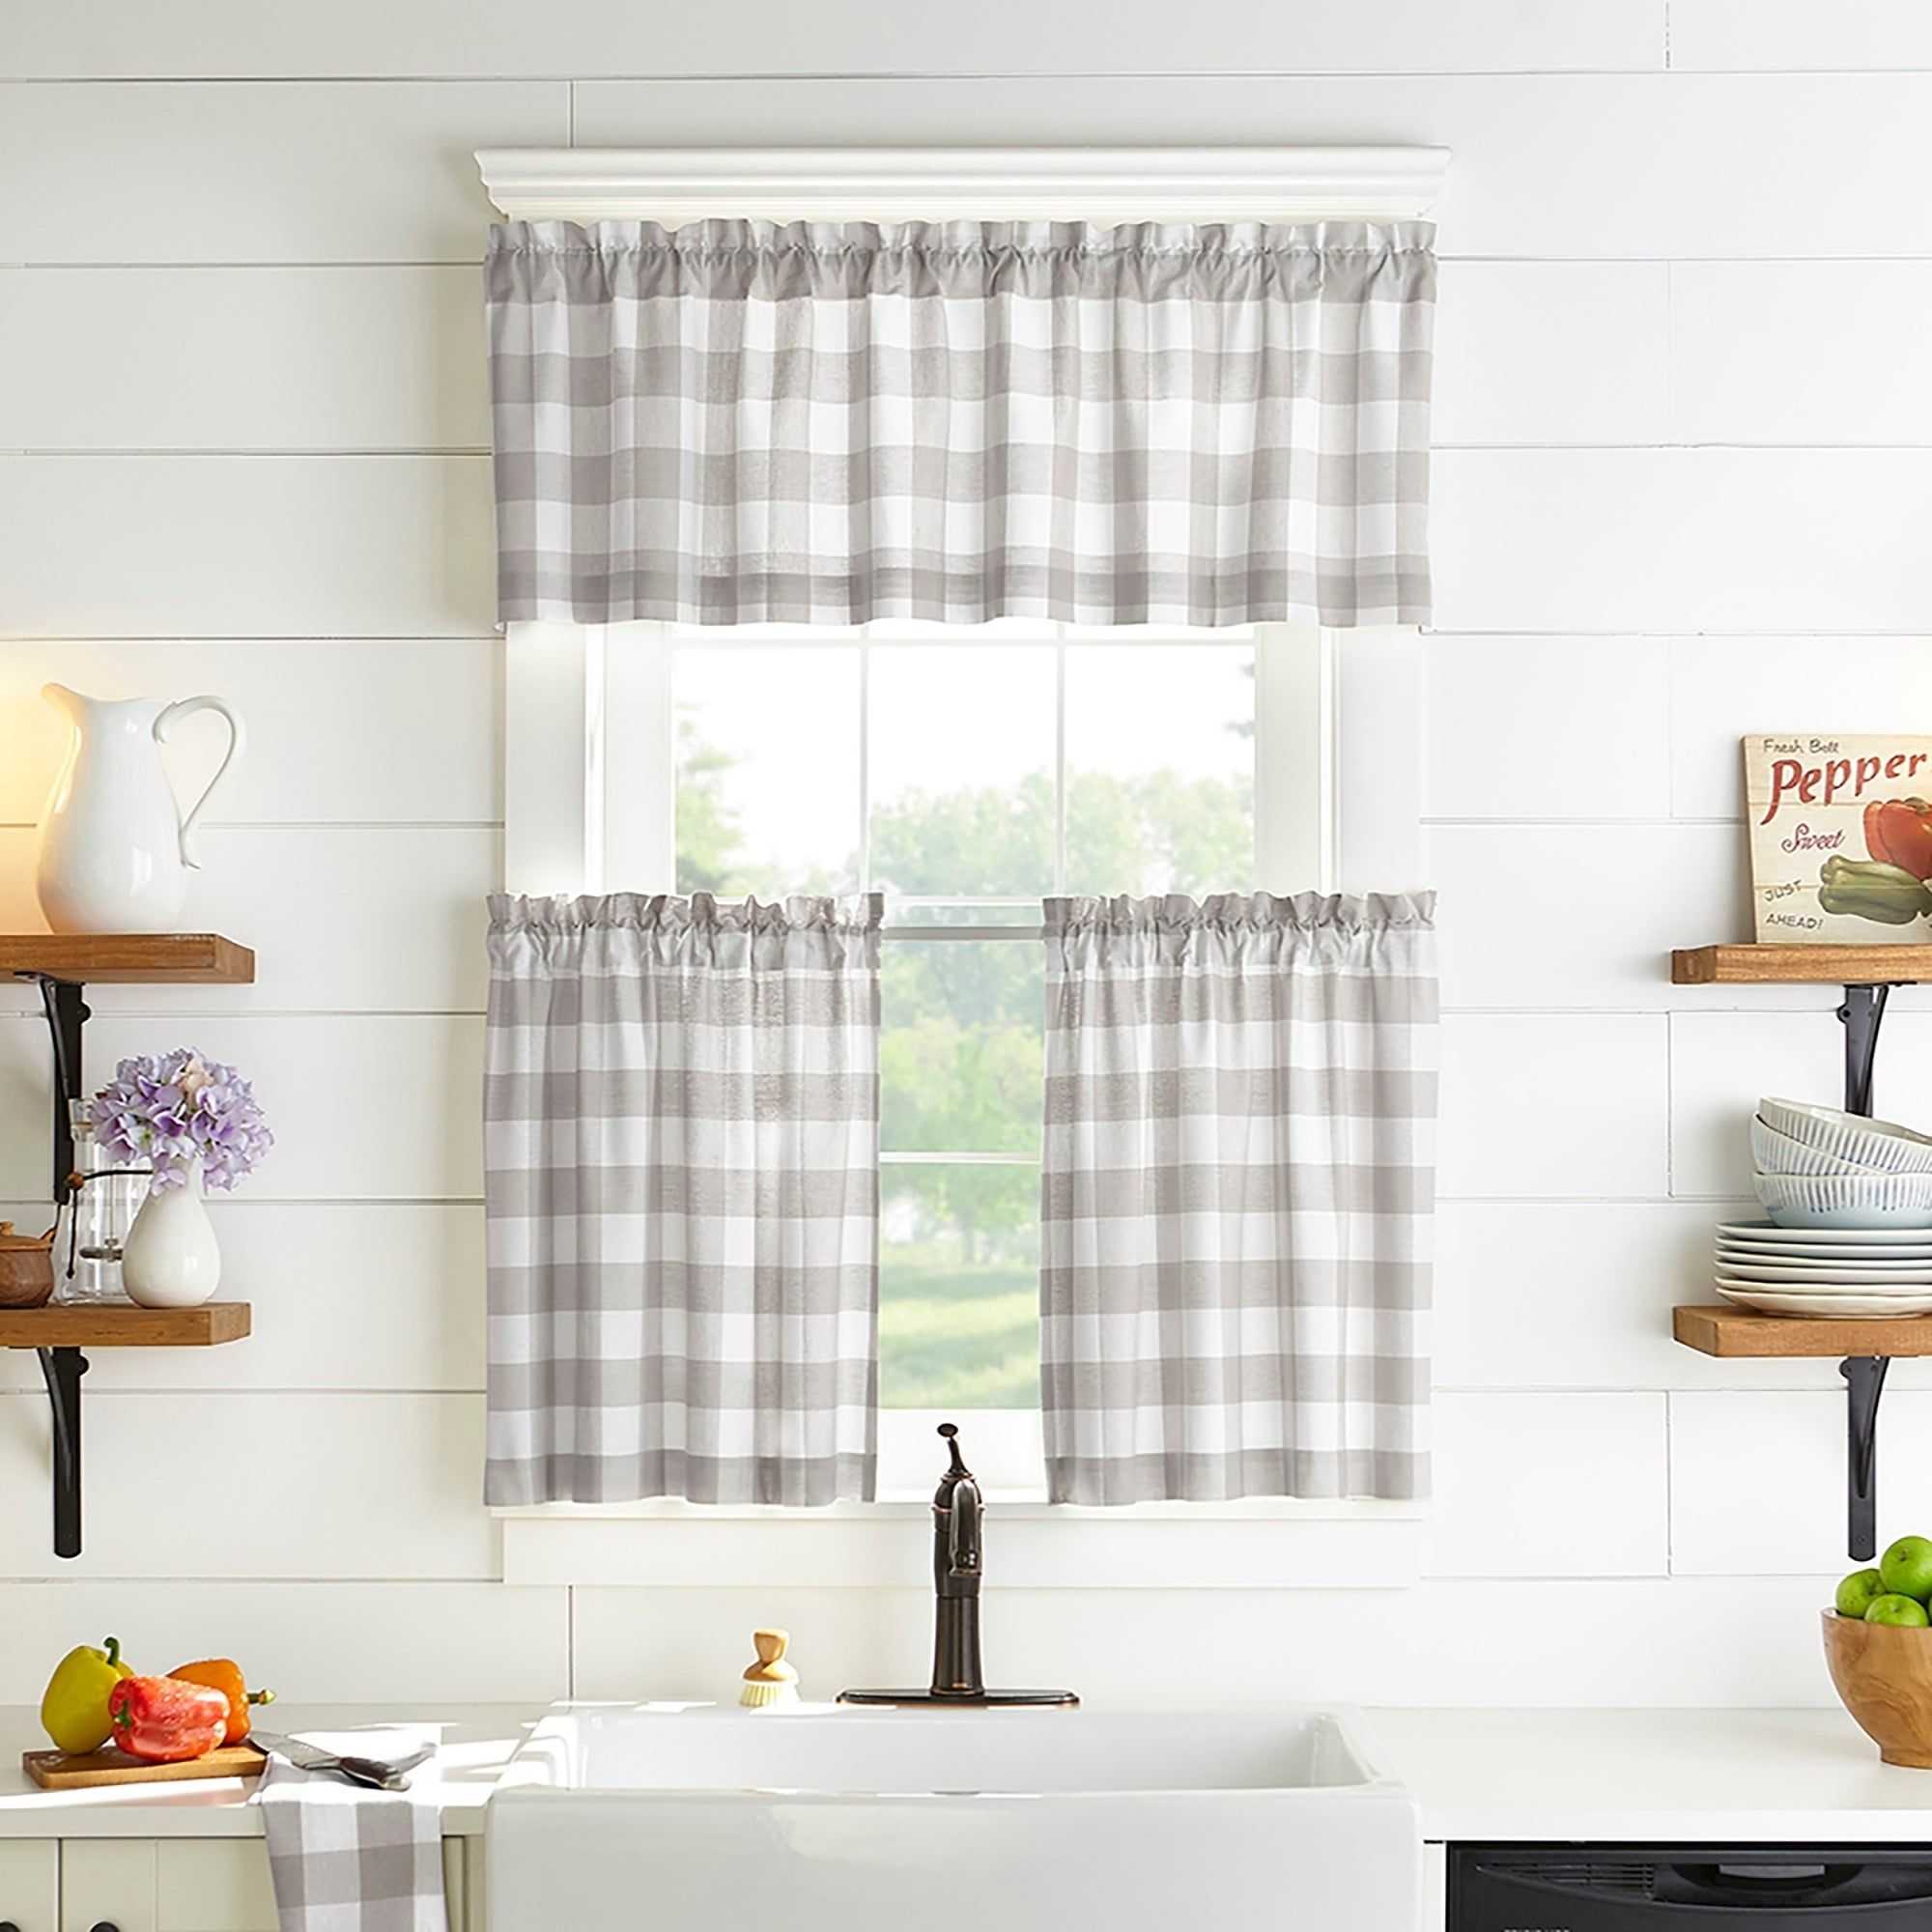 Buy The Gray Barn Curtain Tiers Online At Overstock | Our Regarding Flinders Forge 30 Inch Tiers In Garnet (View 15 of 20)